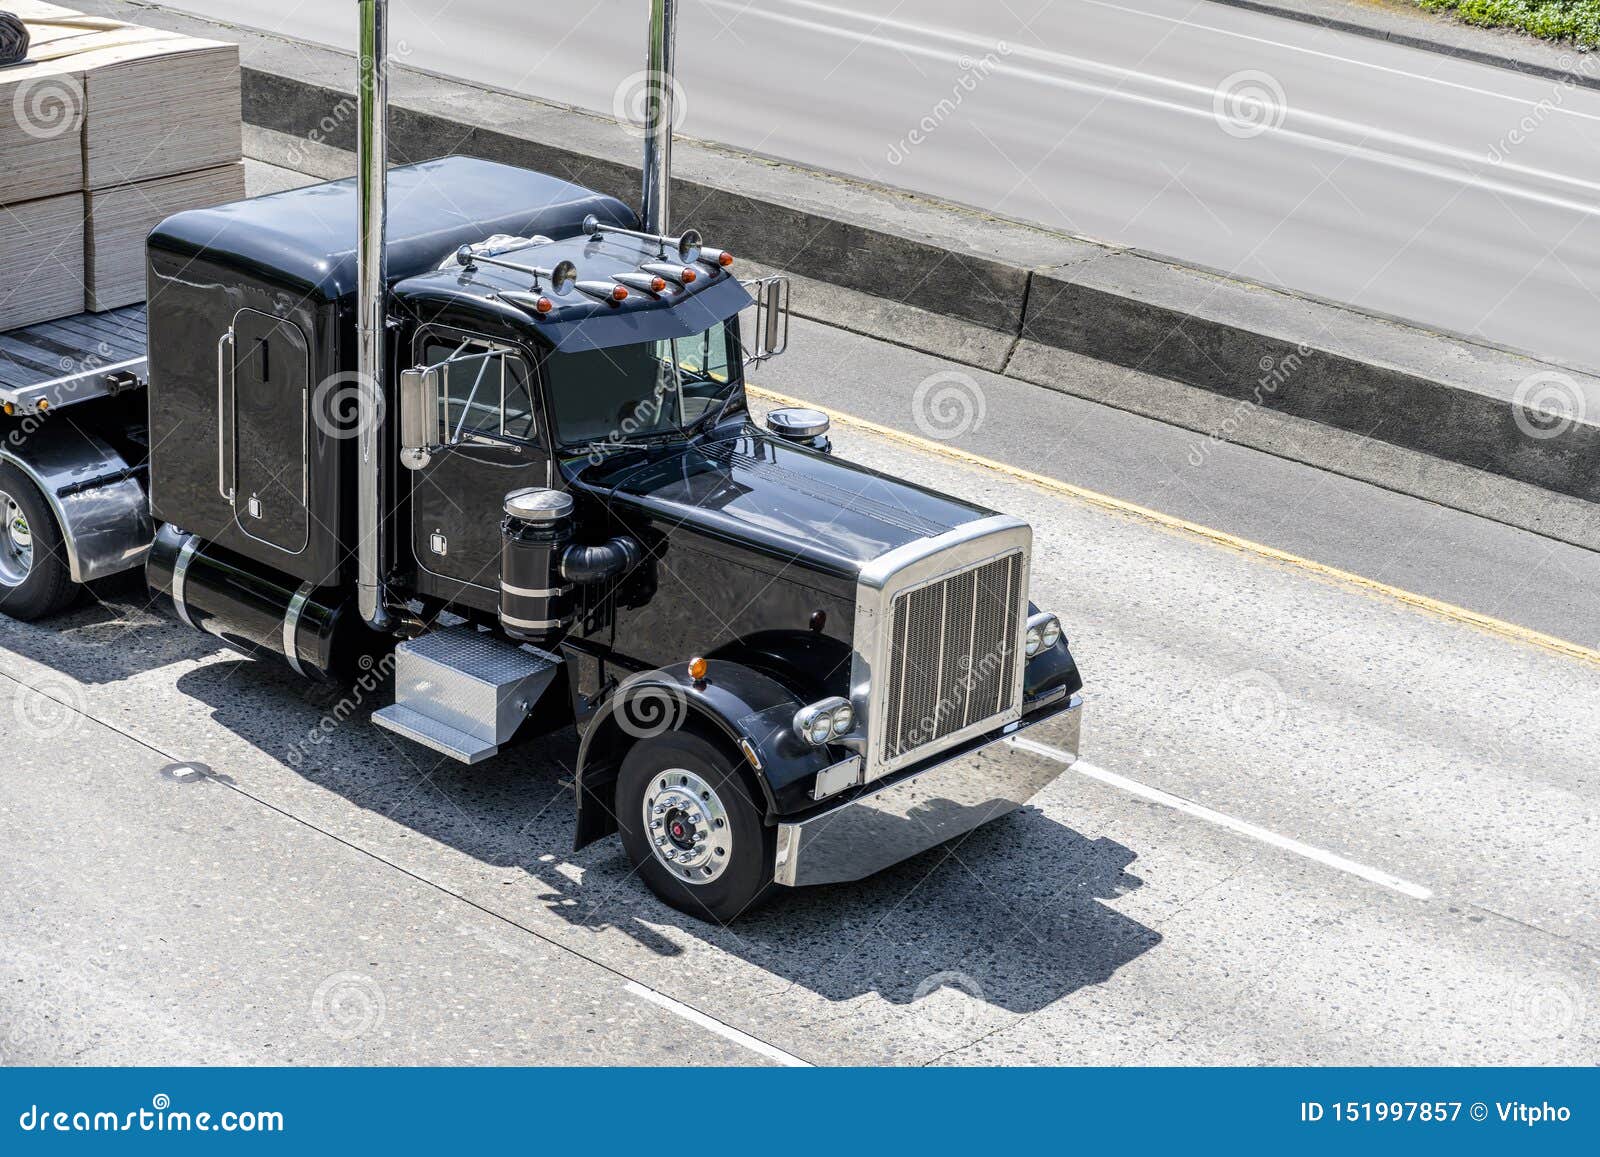 Black Powerful Big Rig Classic Semi Truck Transporting Cargo on Flat Bed  Semi Trailer Moving on Multiline Highway Stock Image - Image of direction,  highway: 151997857